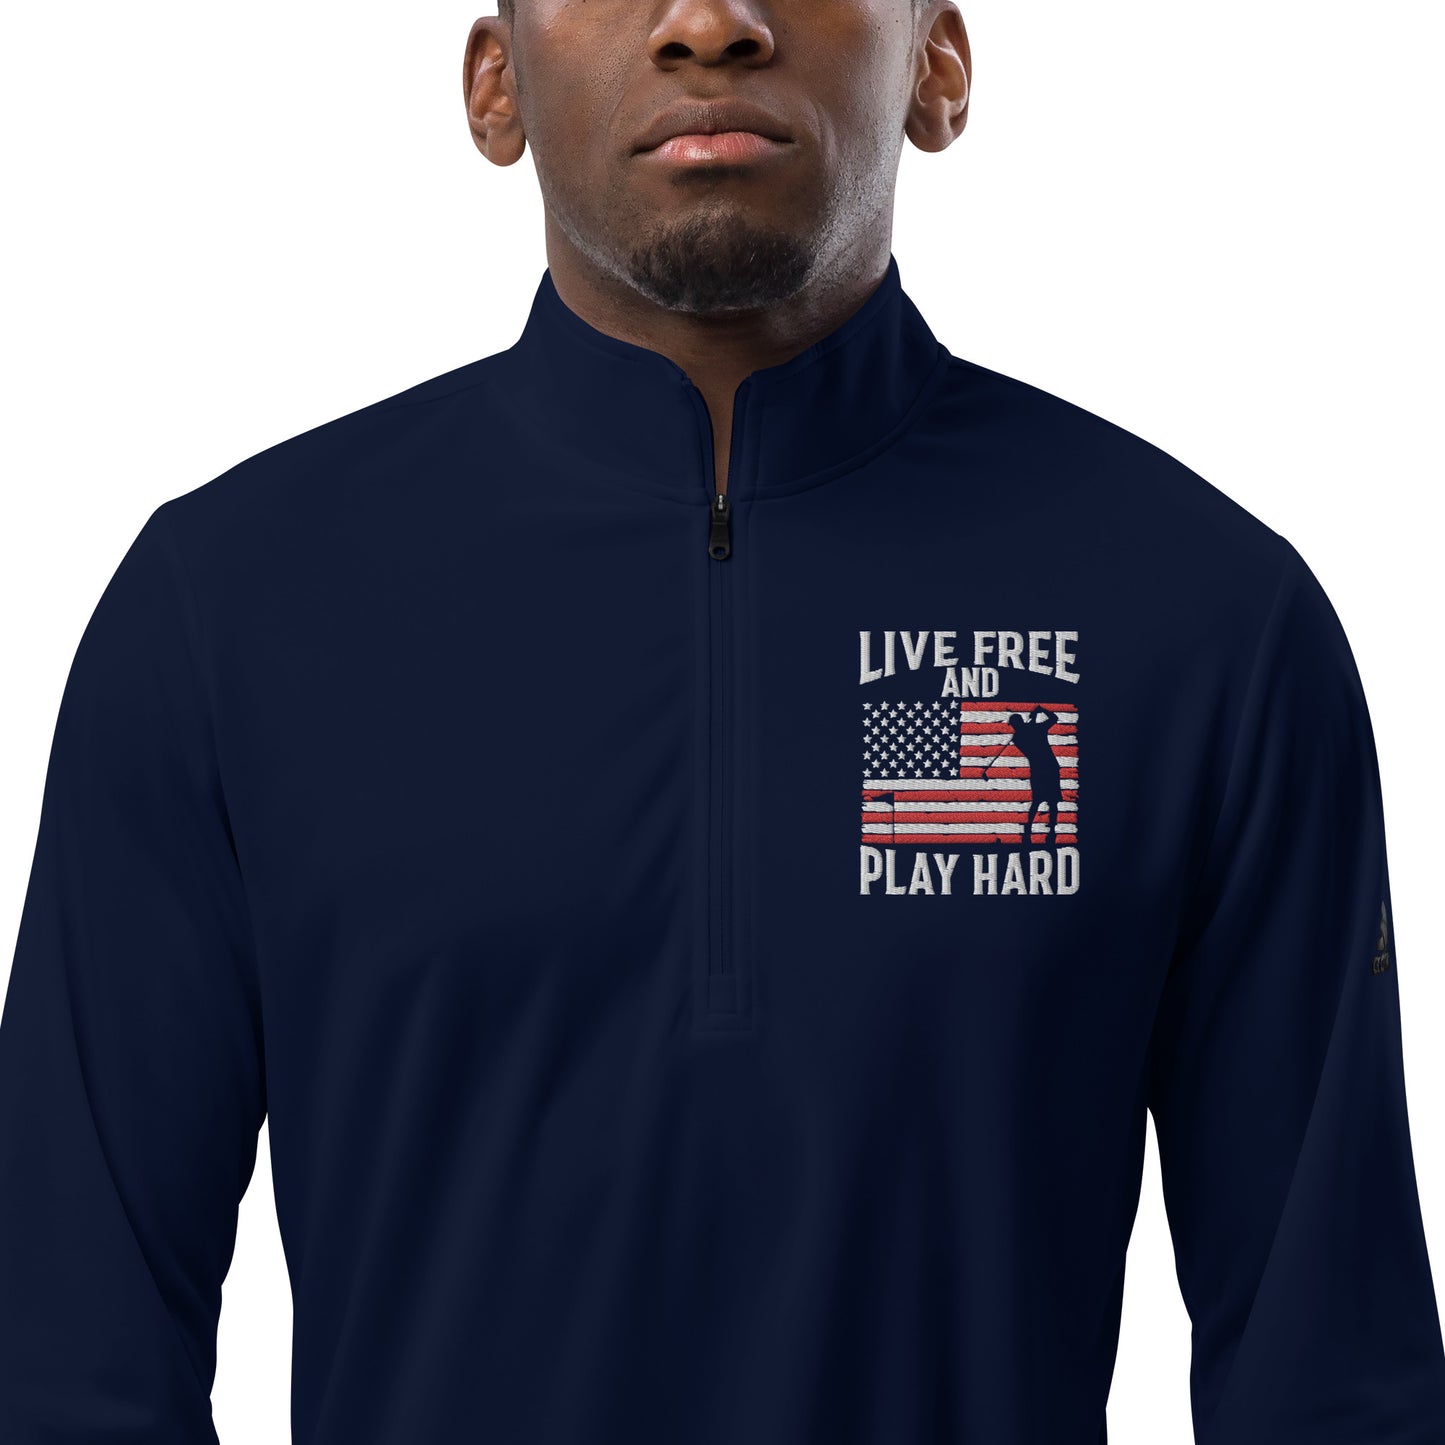 Adidas 'Live Free and Play Hard' 1/4 Zip Golf Pullover